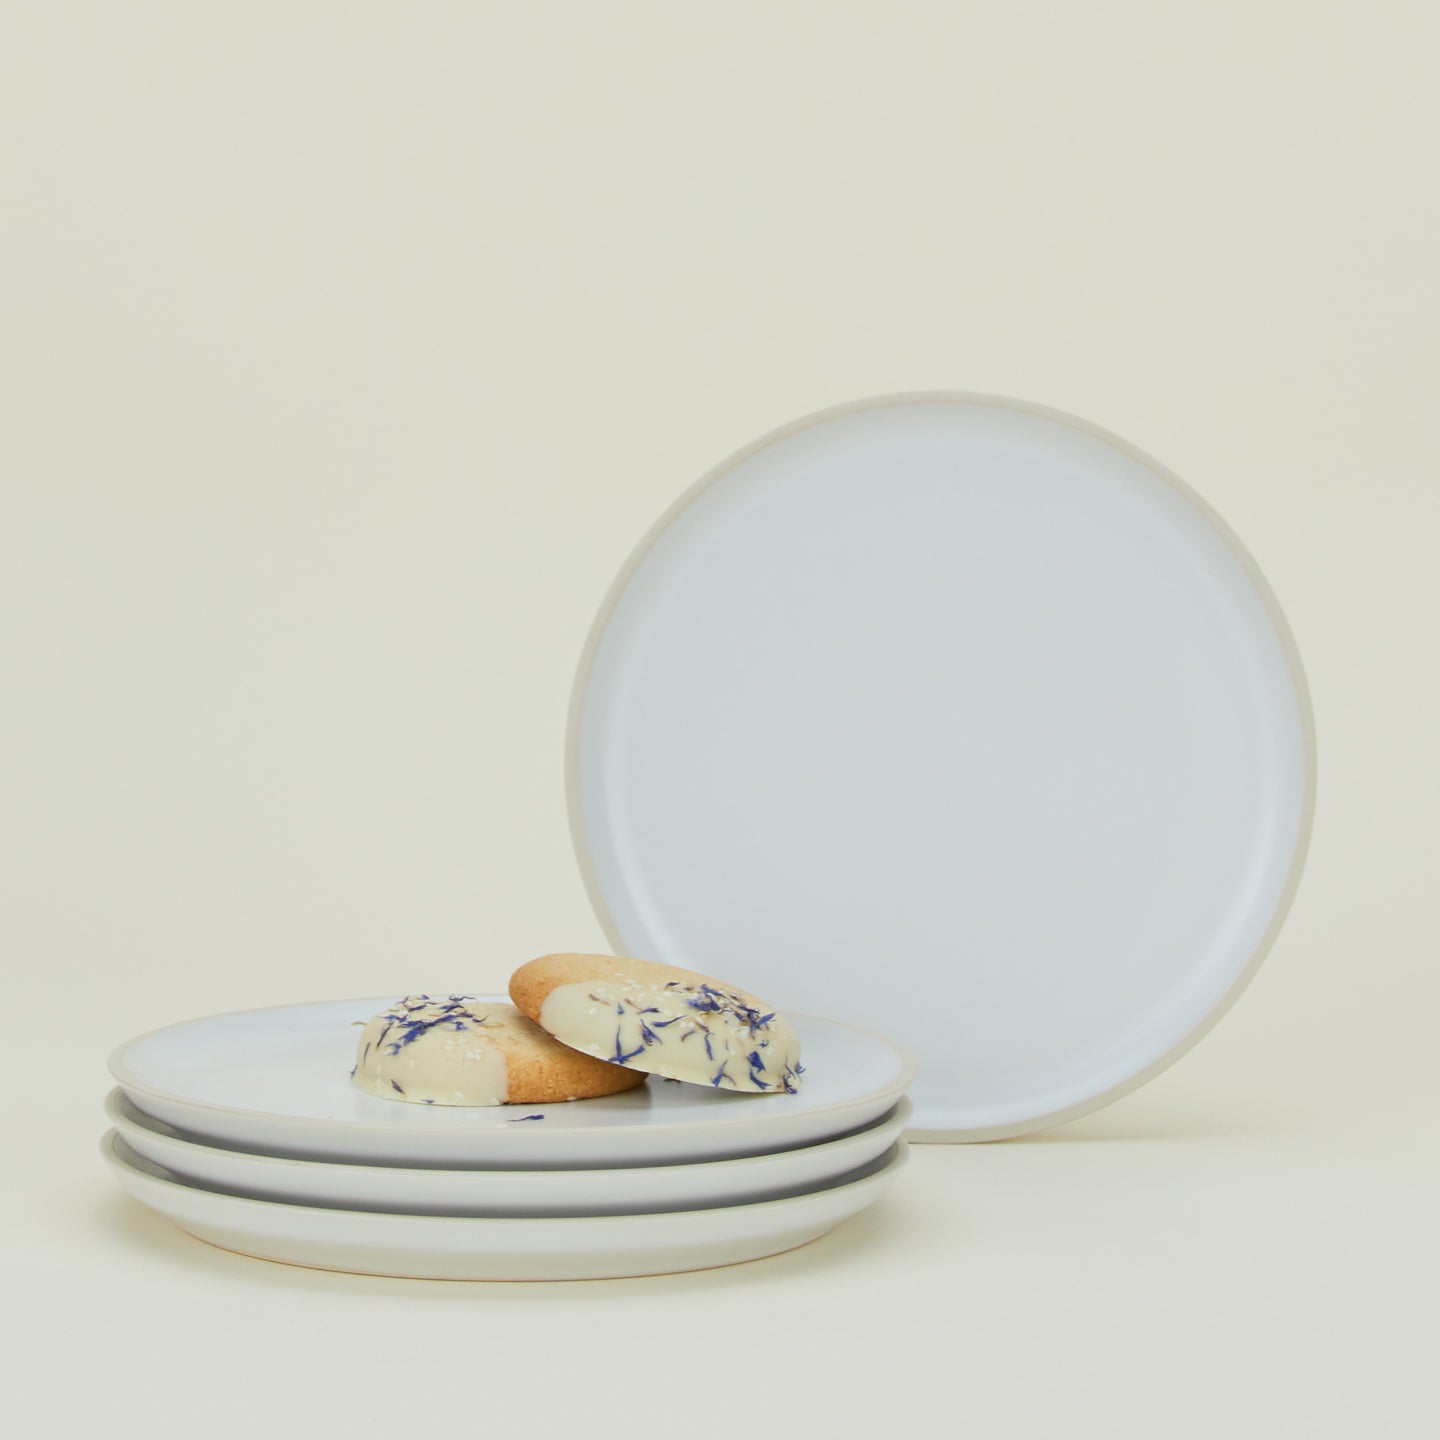 Four Modernist Salad Plates, with cookies.